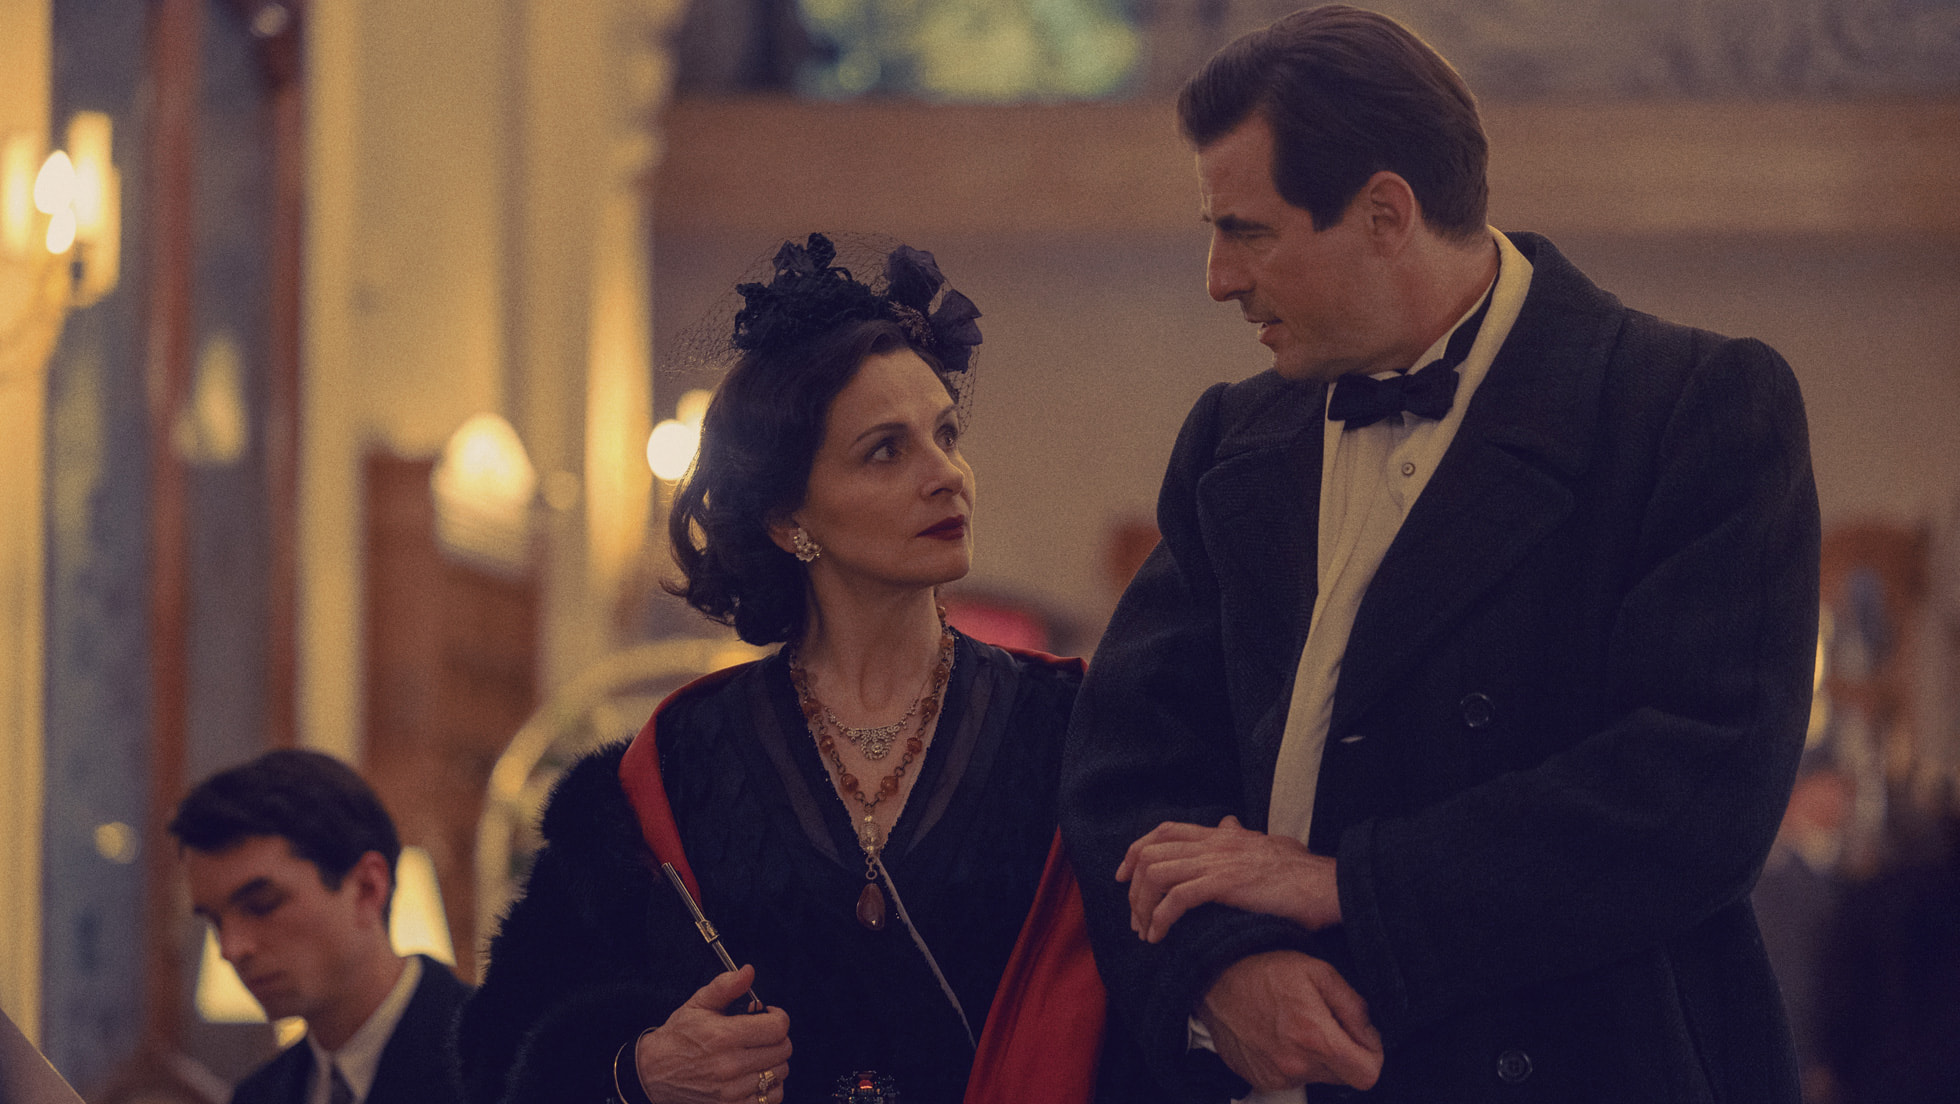 How Juliette Binoche Took On Portraying Coco Chanel in The New Look